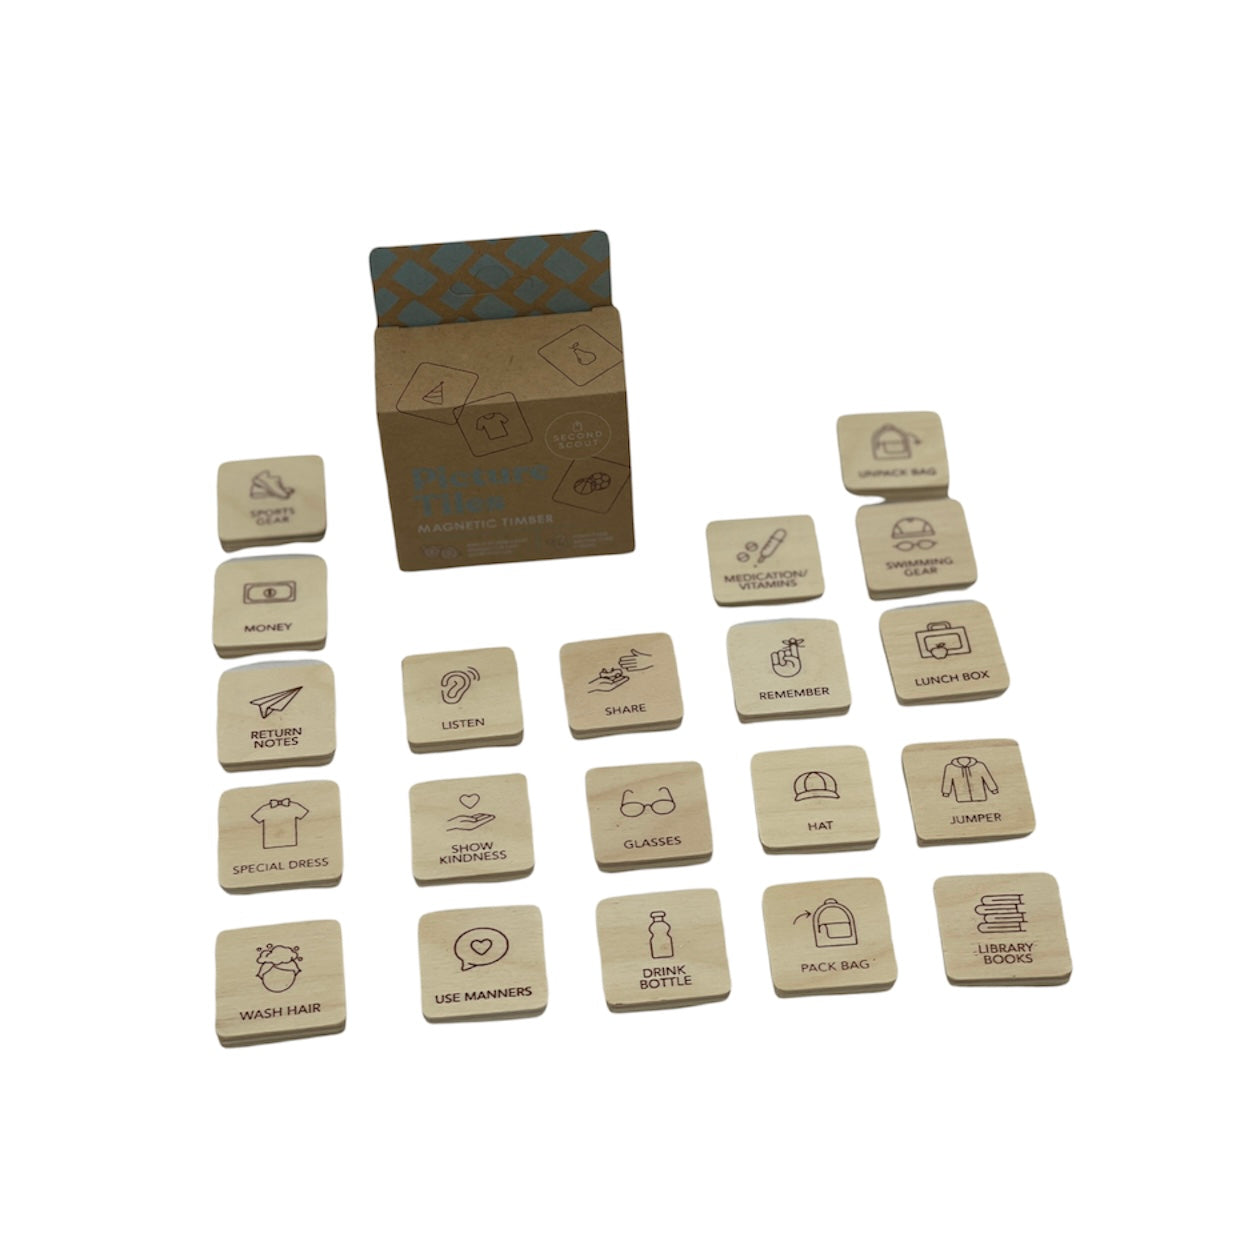 Second Scout Picture Tiles - Reminders wooden tiles laid out in front of packaging box on white background